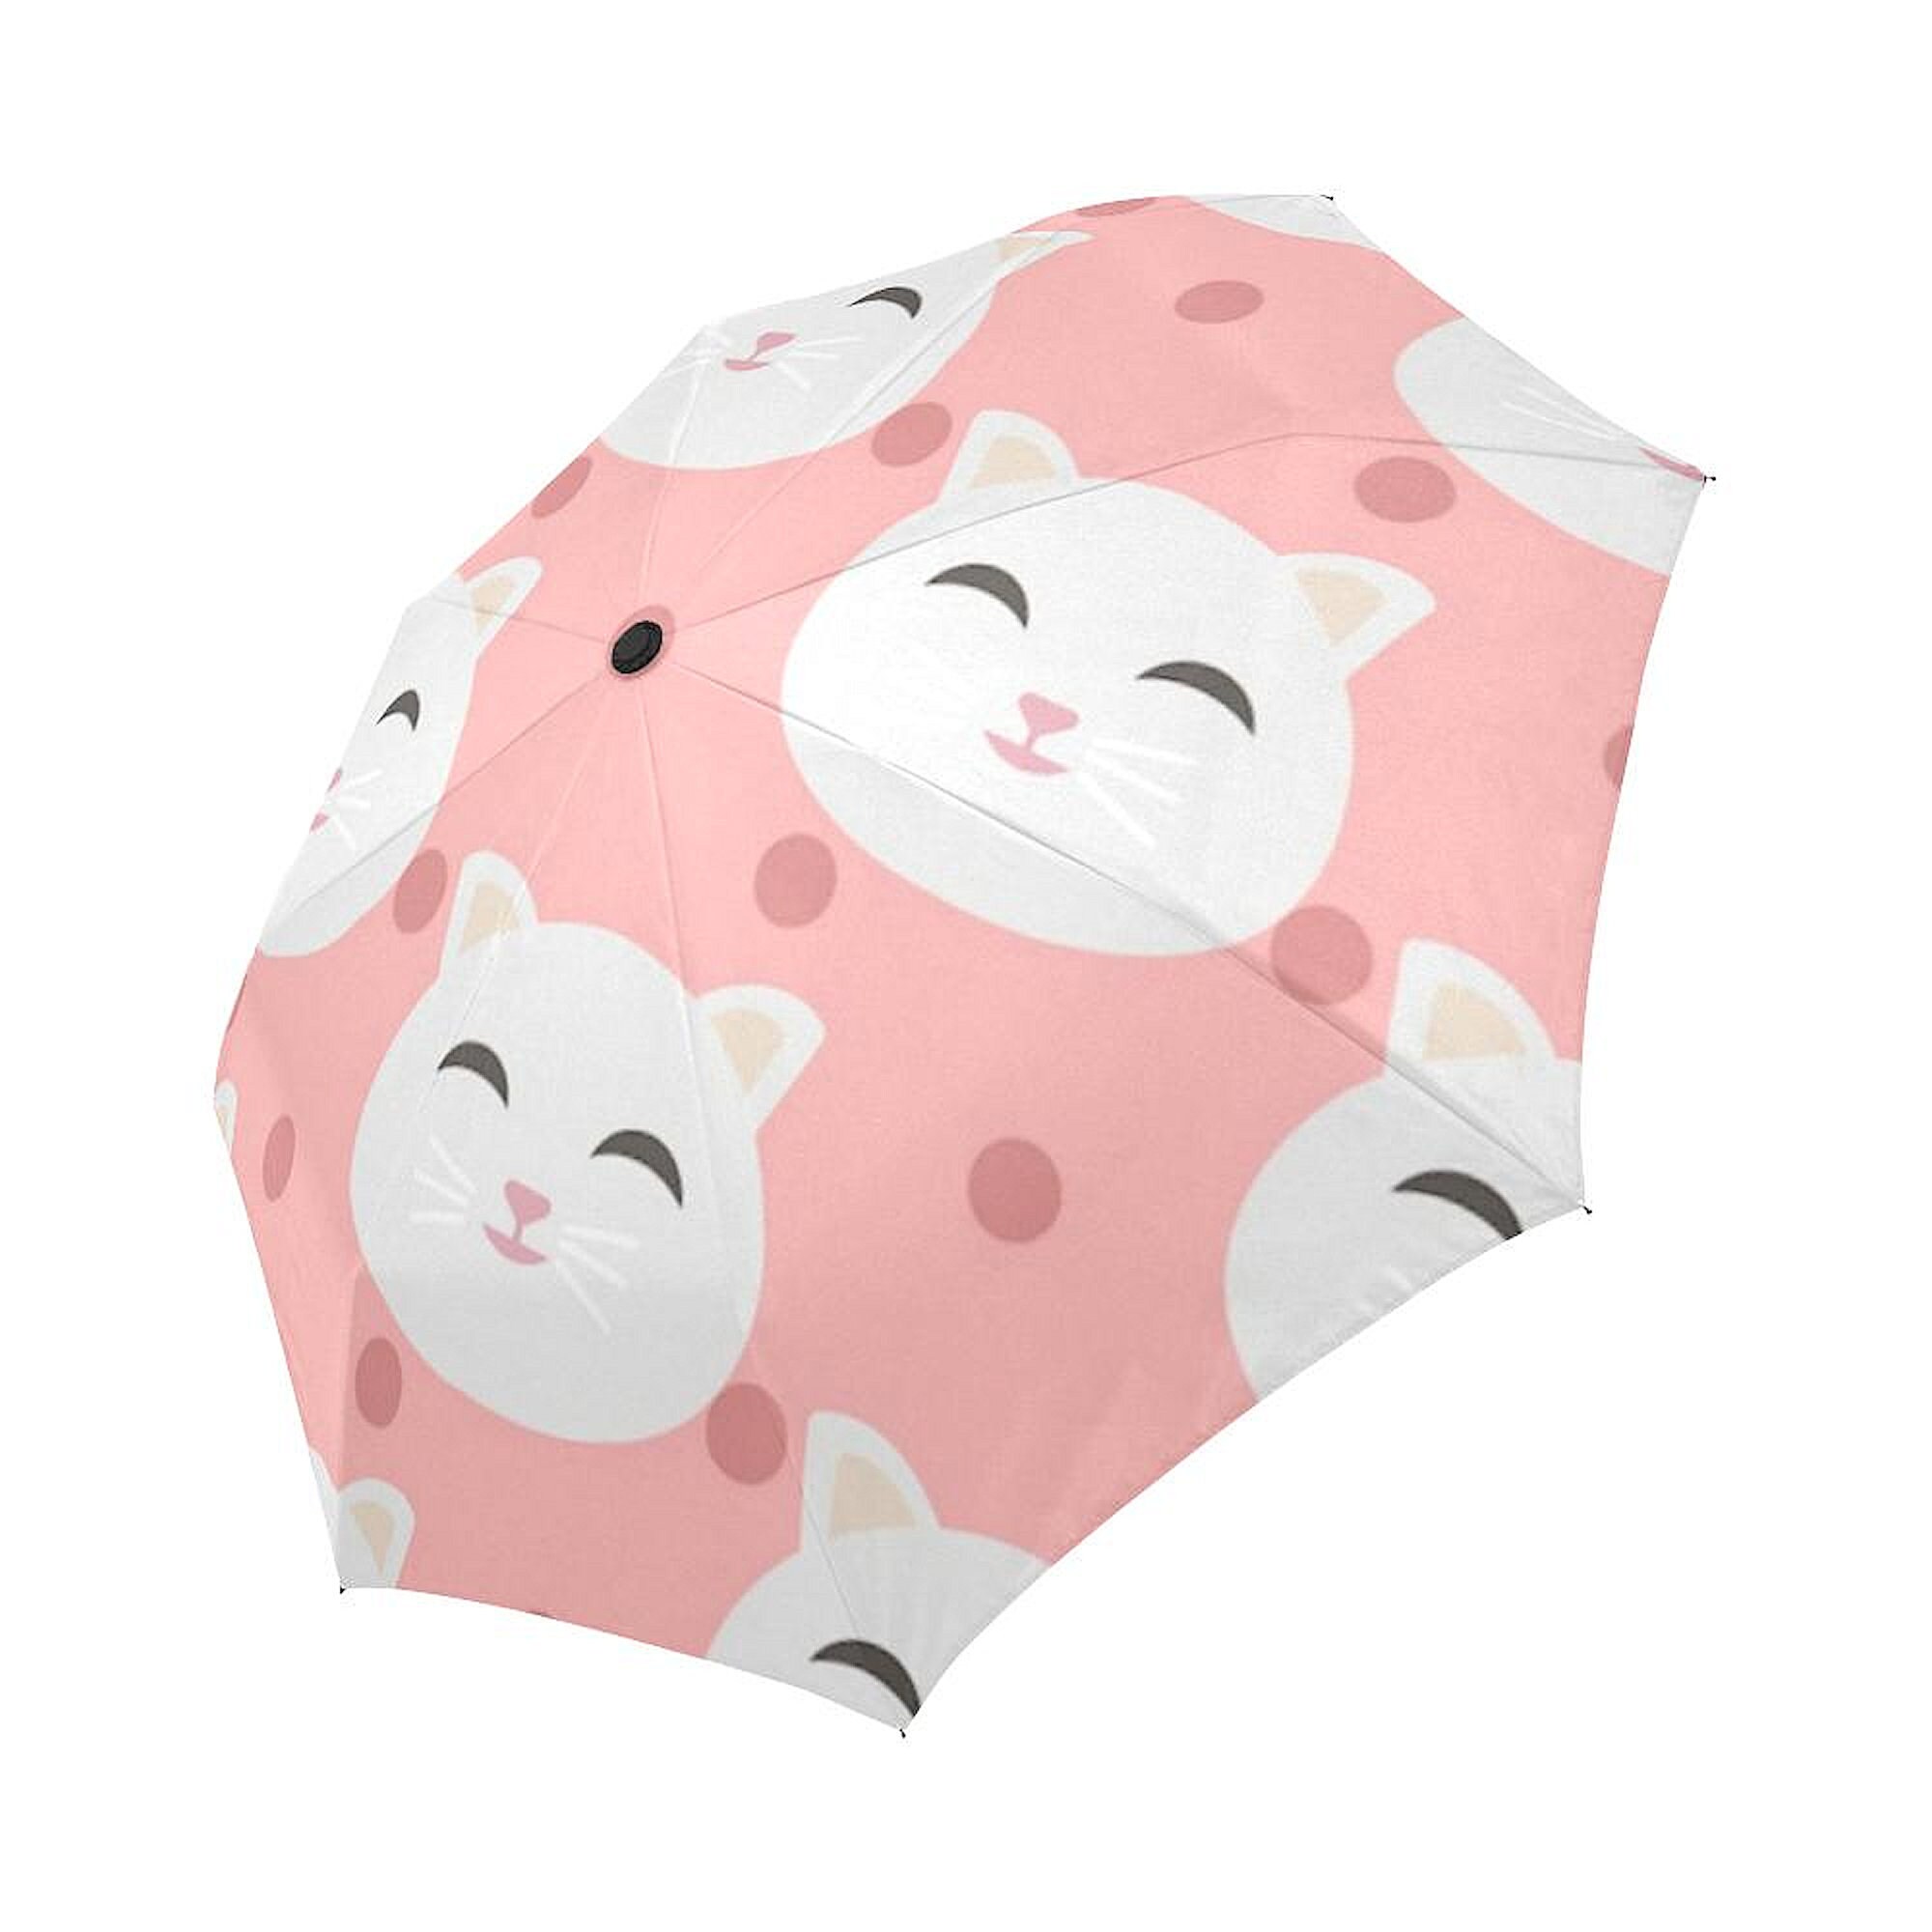 Compact & Portable Accessory with Photo-Realistic Kitty Images The Paragon Cat Umbrella 